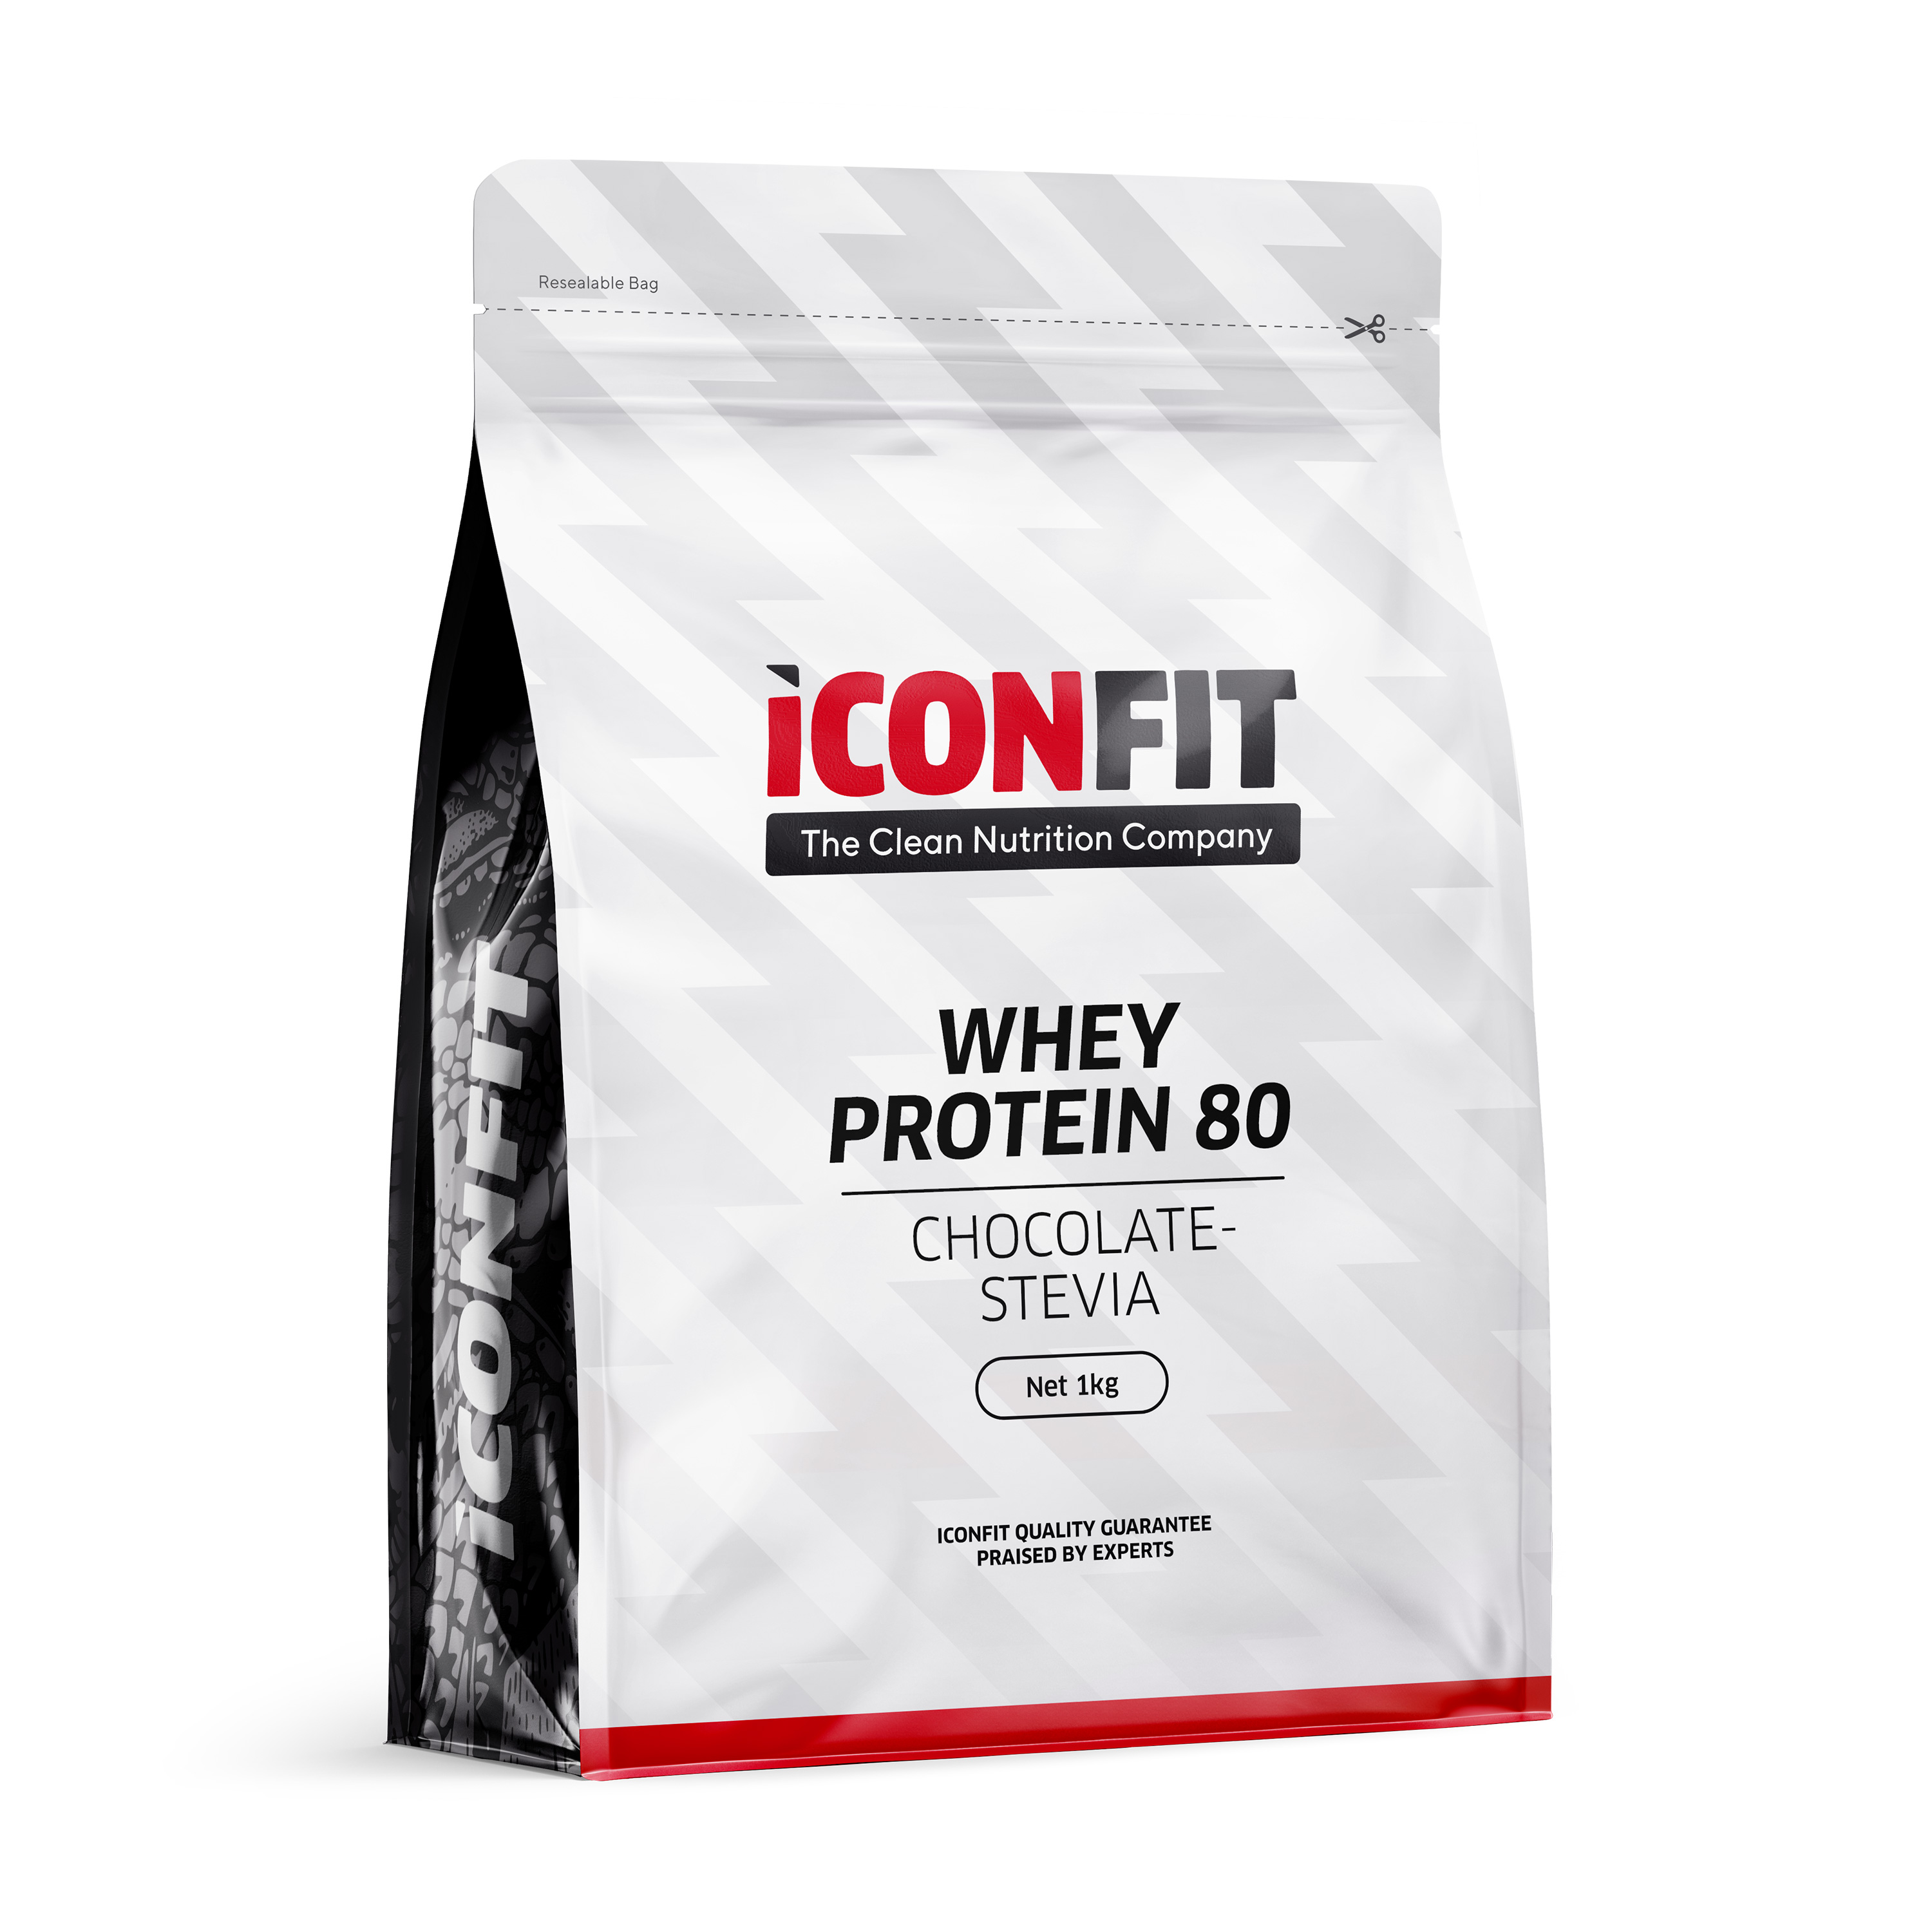 ICONFIT-Whey-Protein-80-Chocolate-with-Stevia-1000g